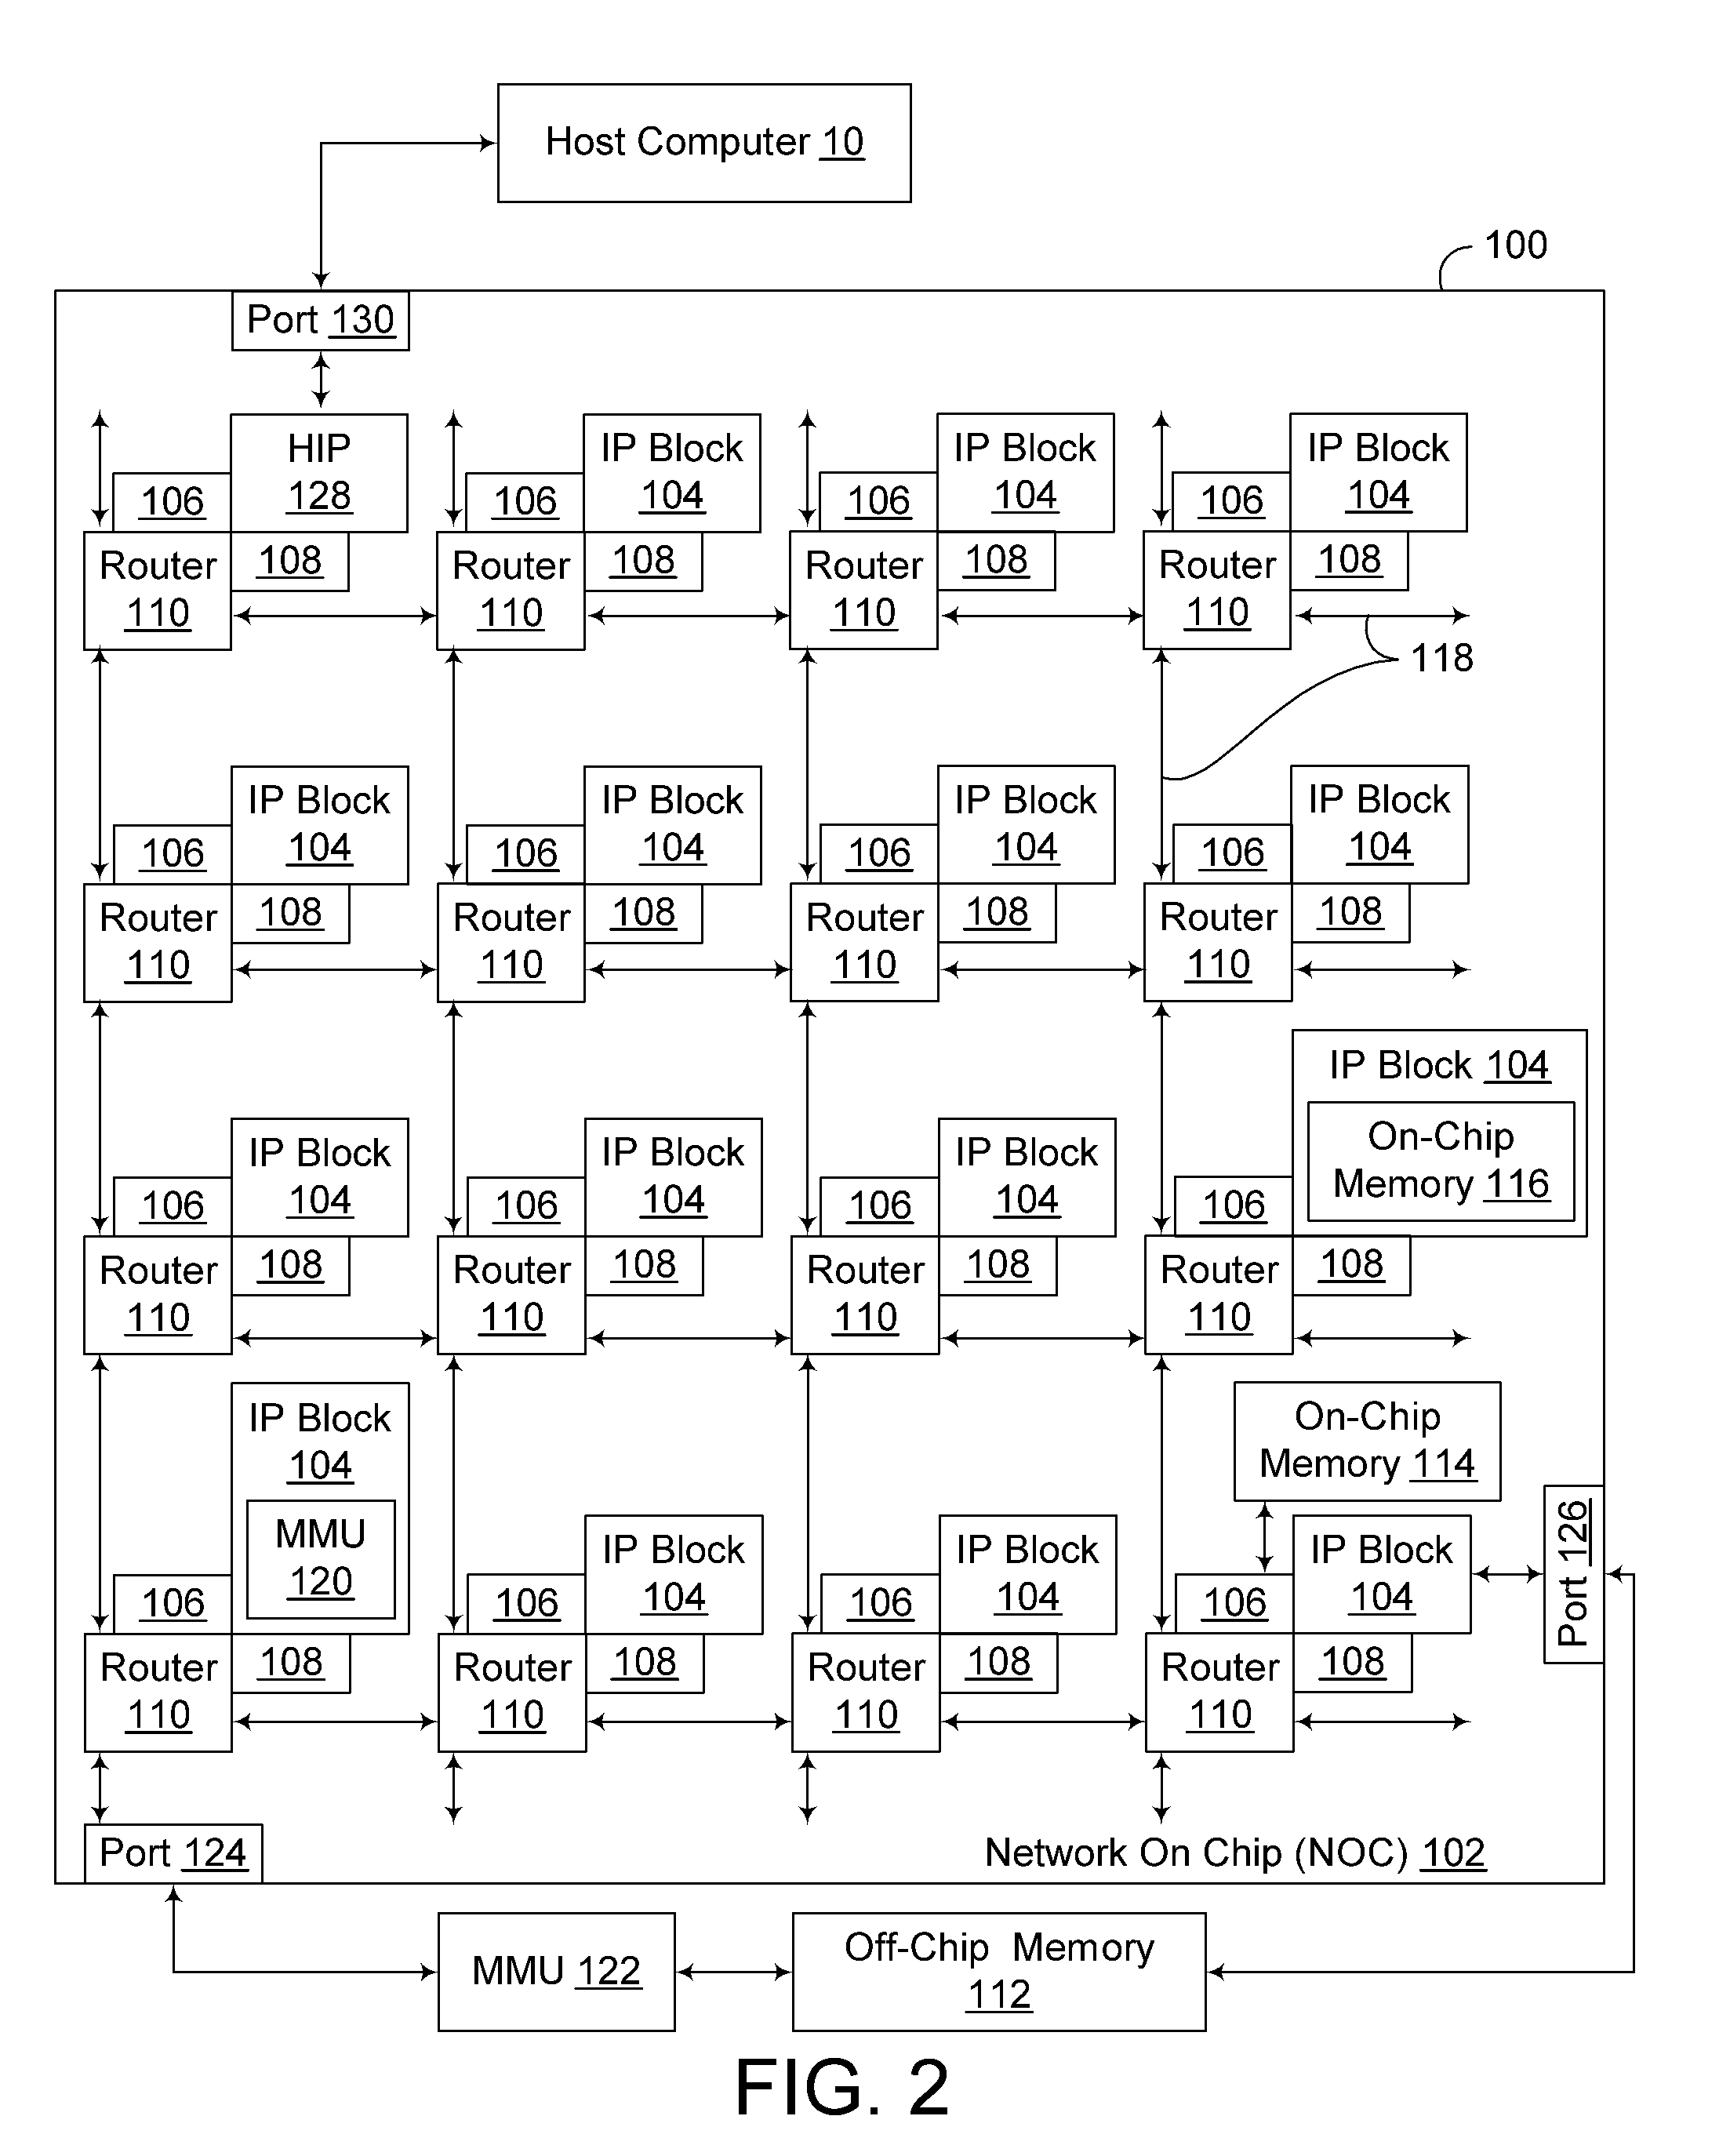 Message selection for inter-thread communication in a multithreaded processor